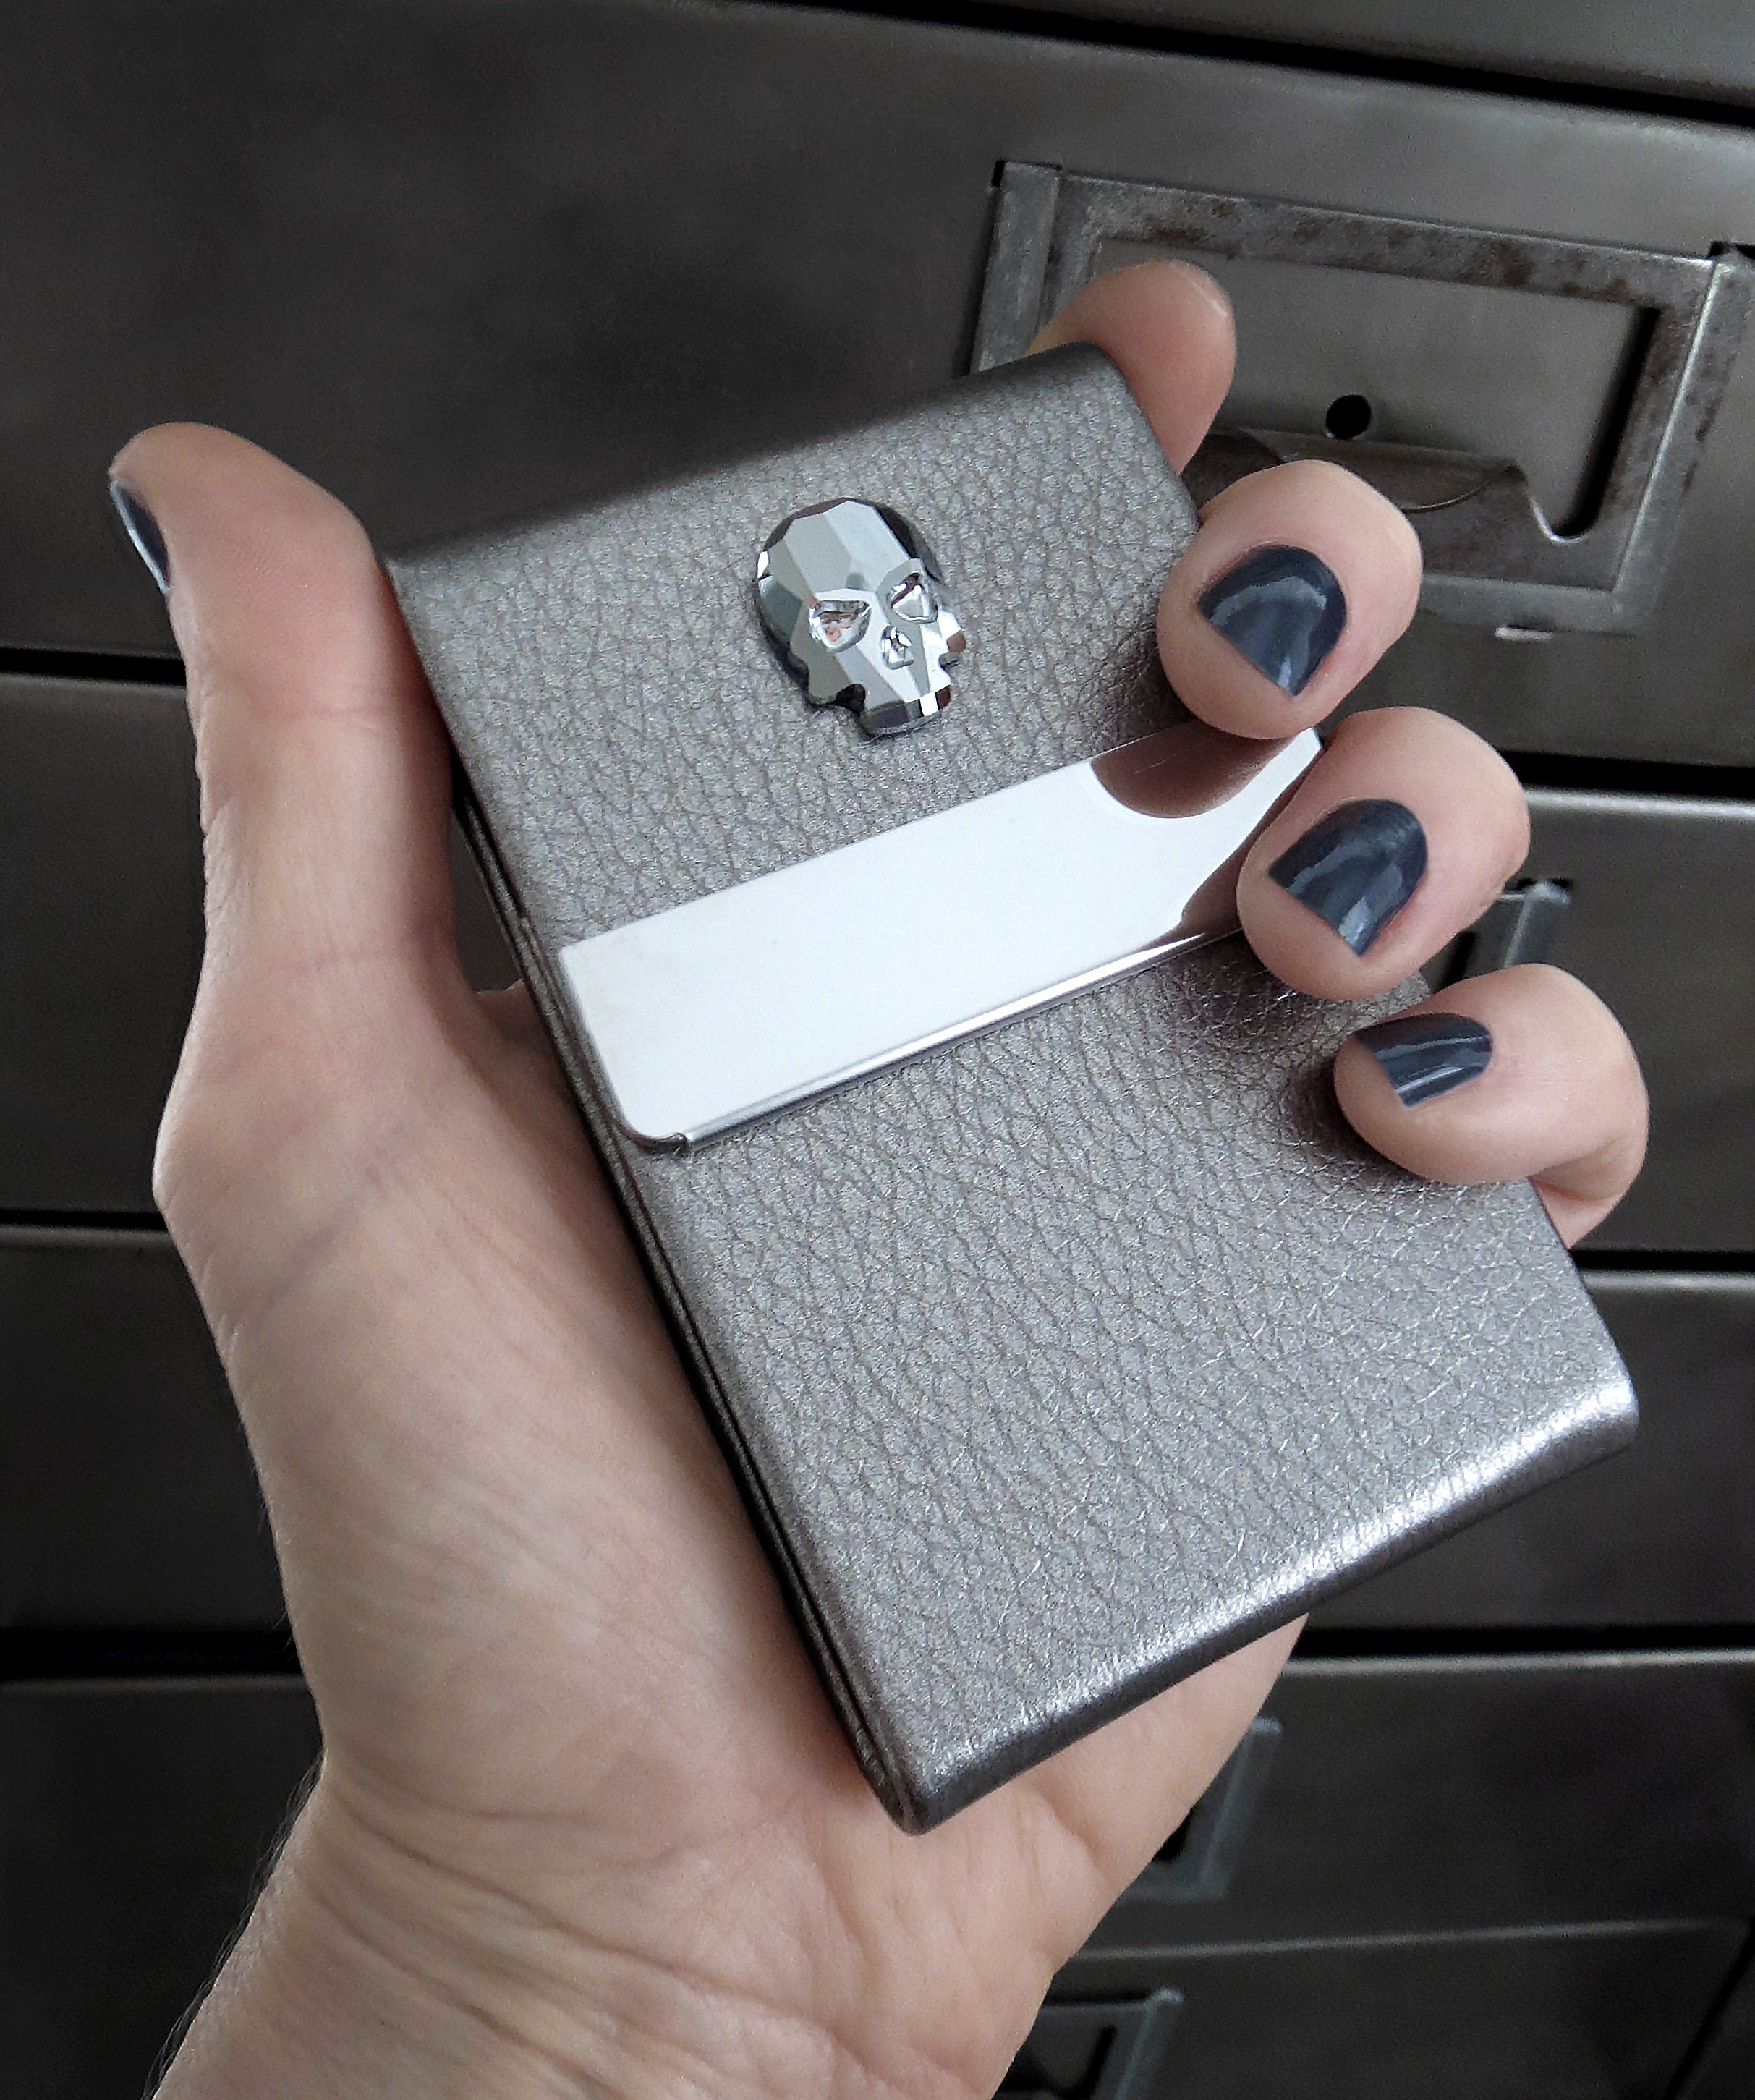 Crystal Skull Business Card Holder Case - Metallic Silver Vegan Faux Leather Card Case - Unisex Slim Wallet for Money, ID Card, Credit Cards